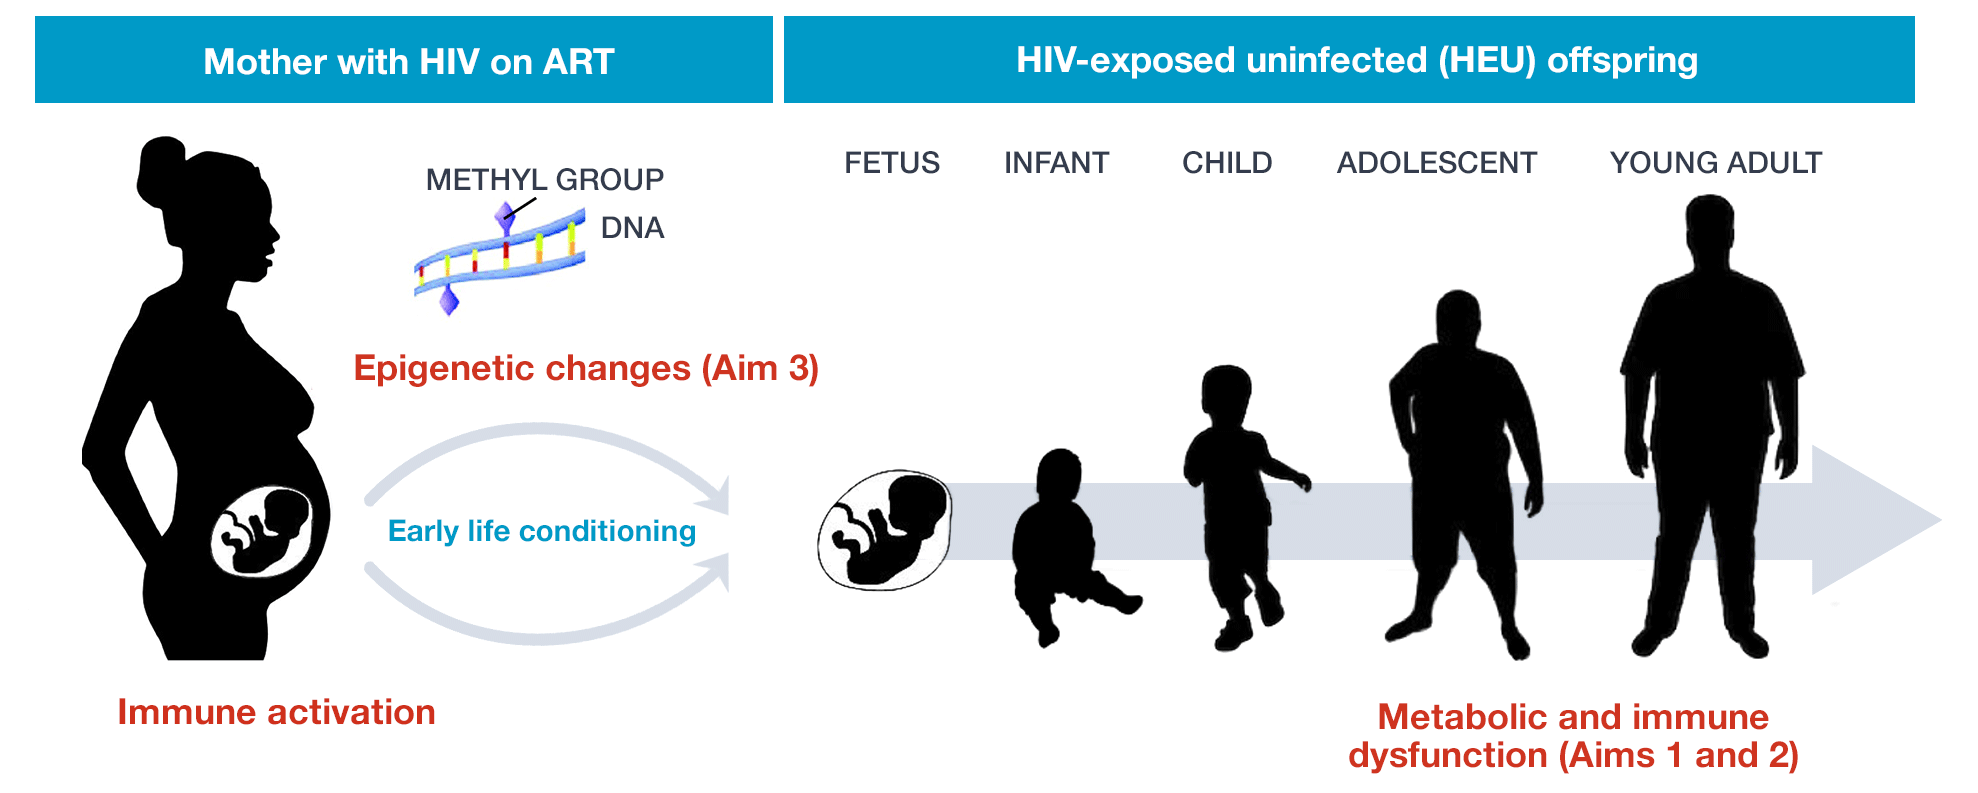 Diagram showing metabolic and immune dysfunction in the adolescent and young adult children born to mothers with HIV on ART.